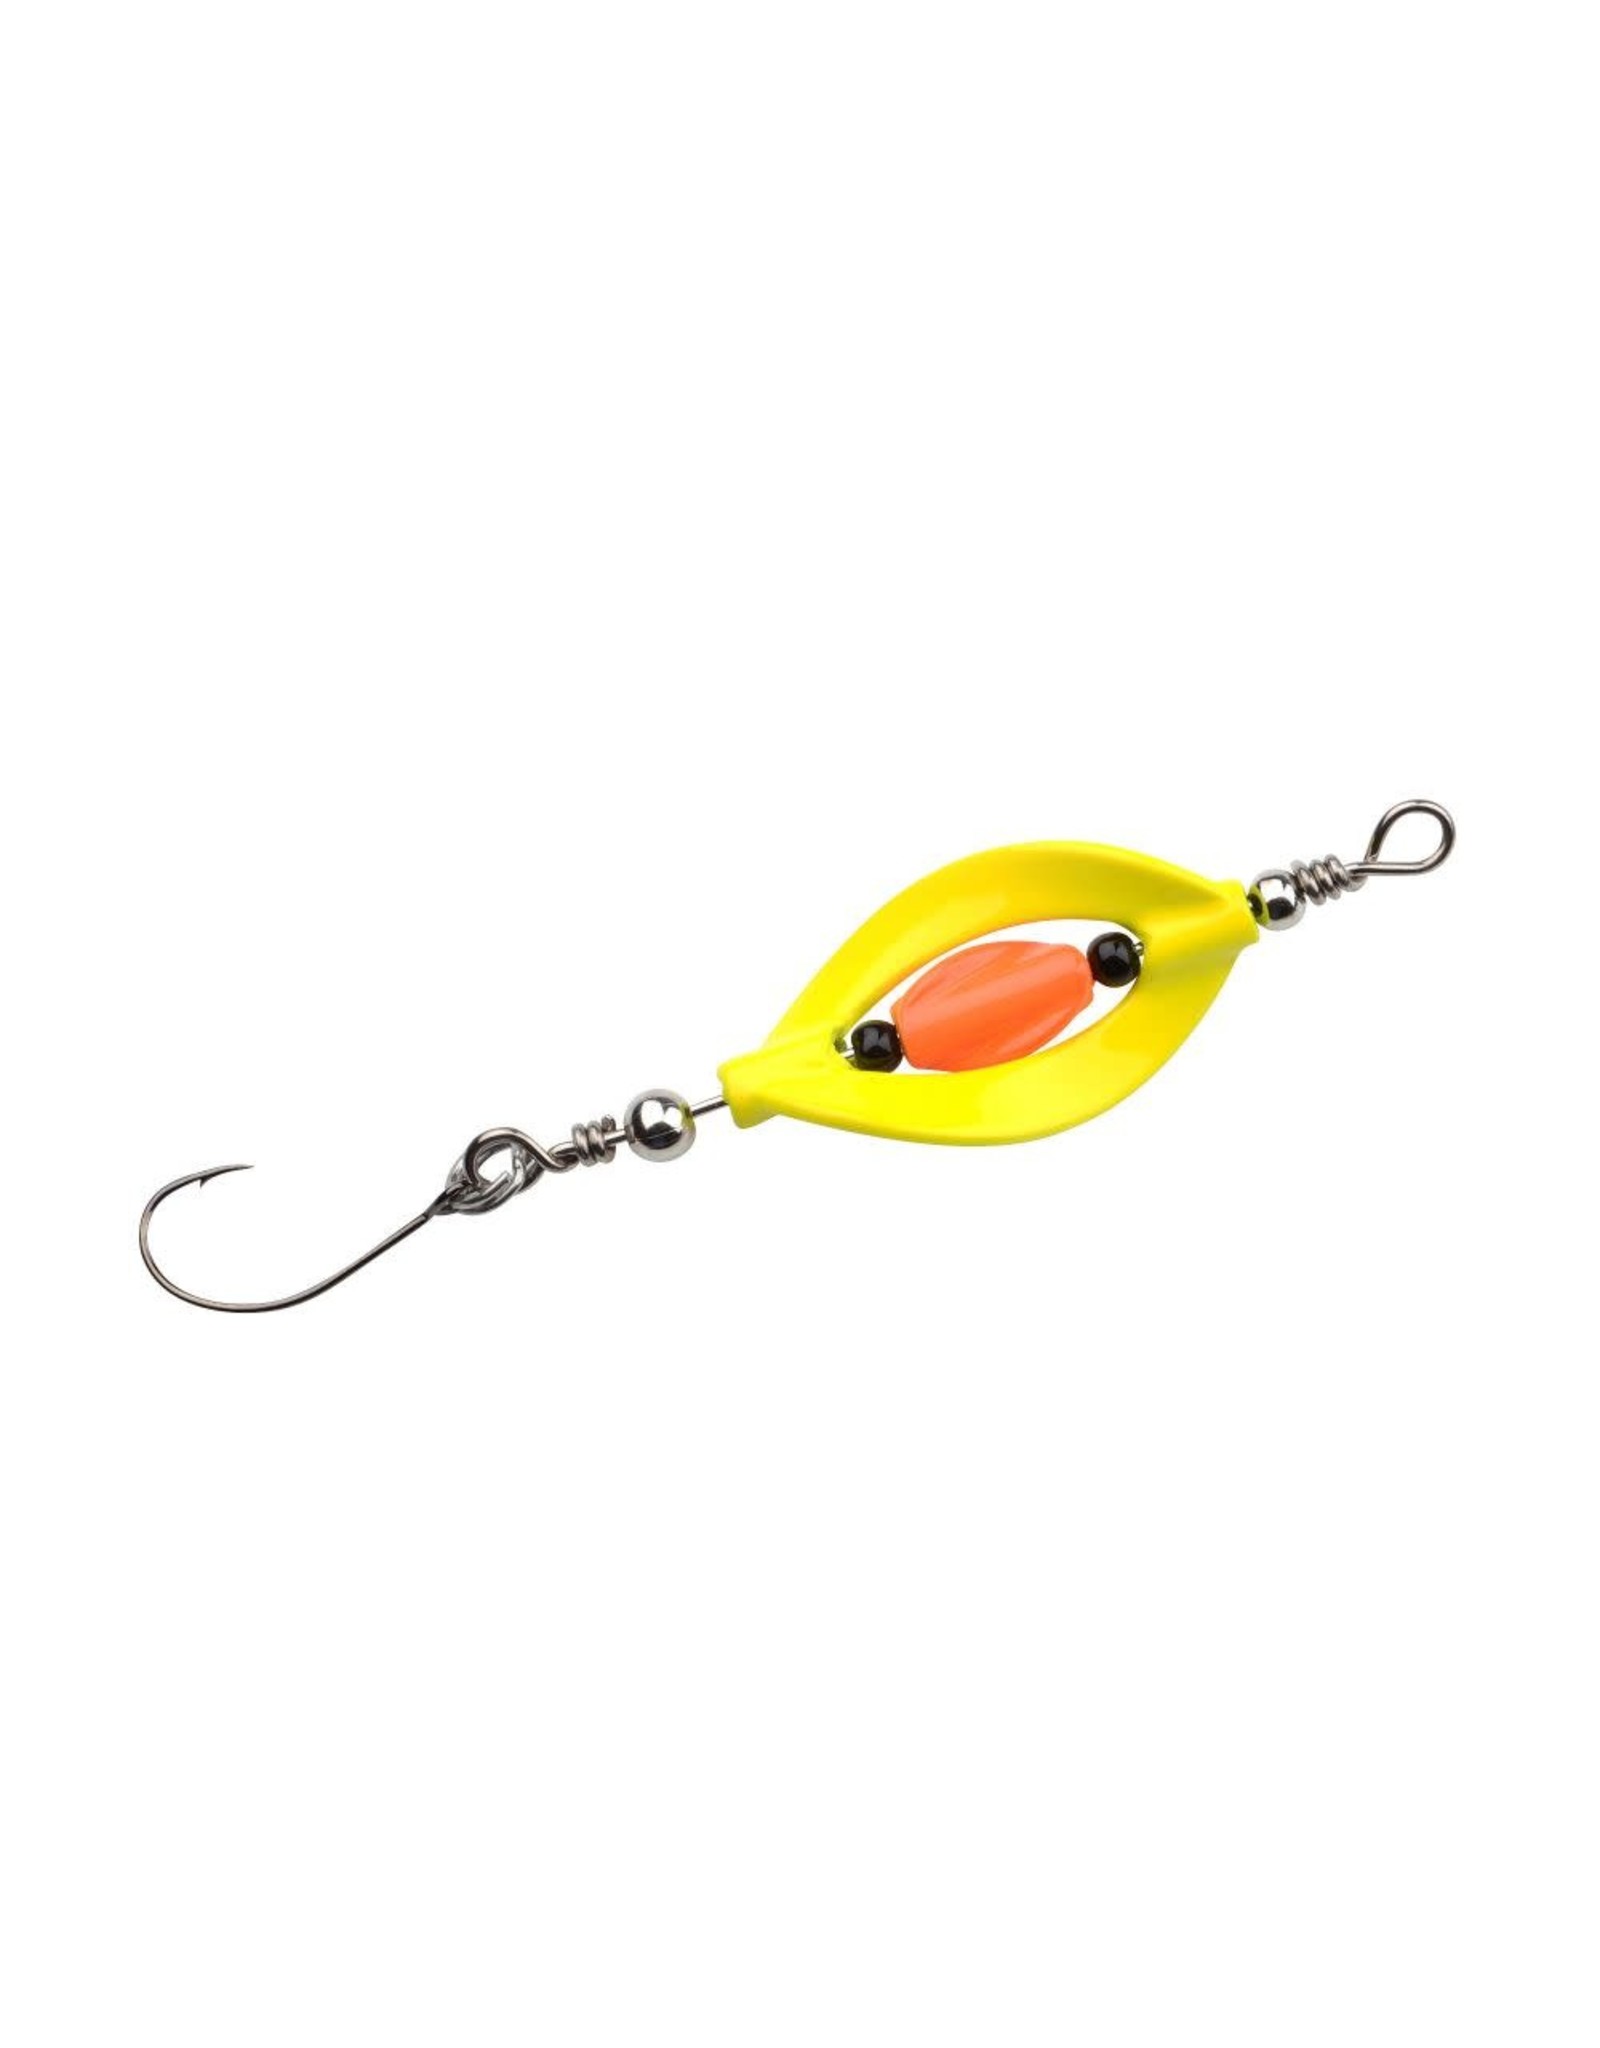 Trout Master INCY DOUBLE SPIN SPOON SUNSHINE 3.3G